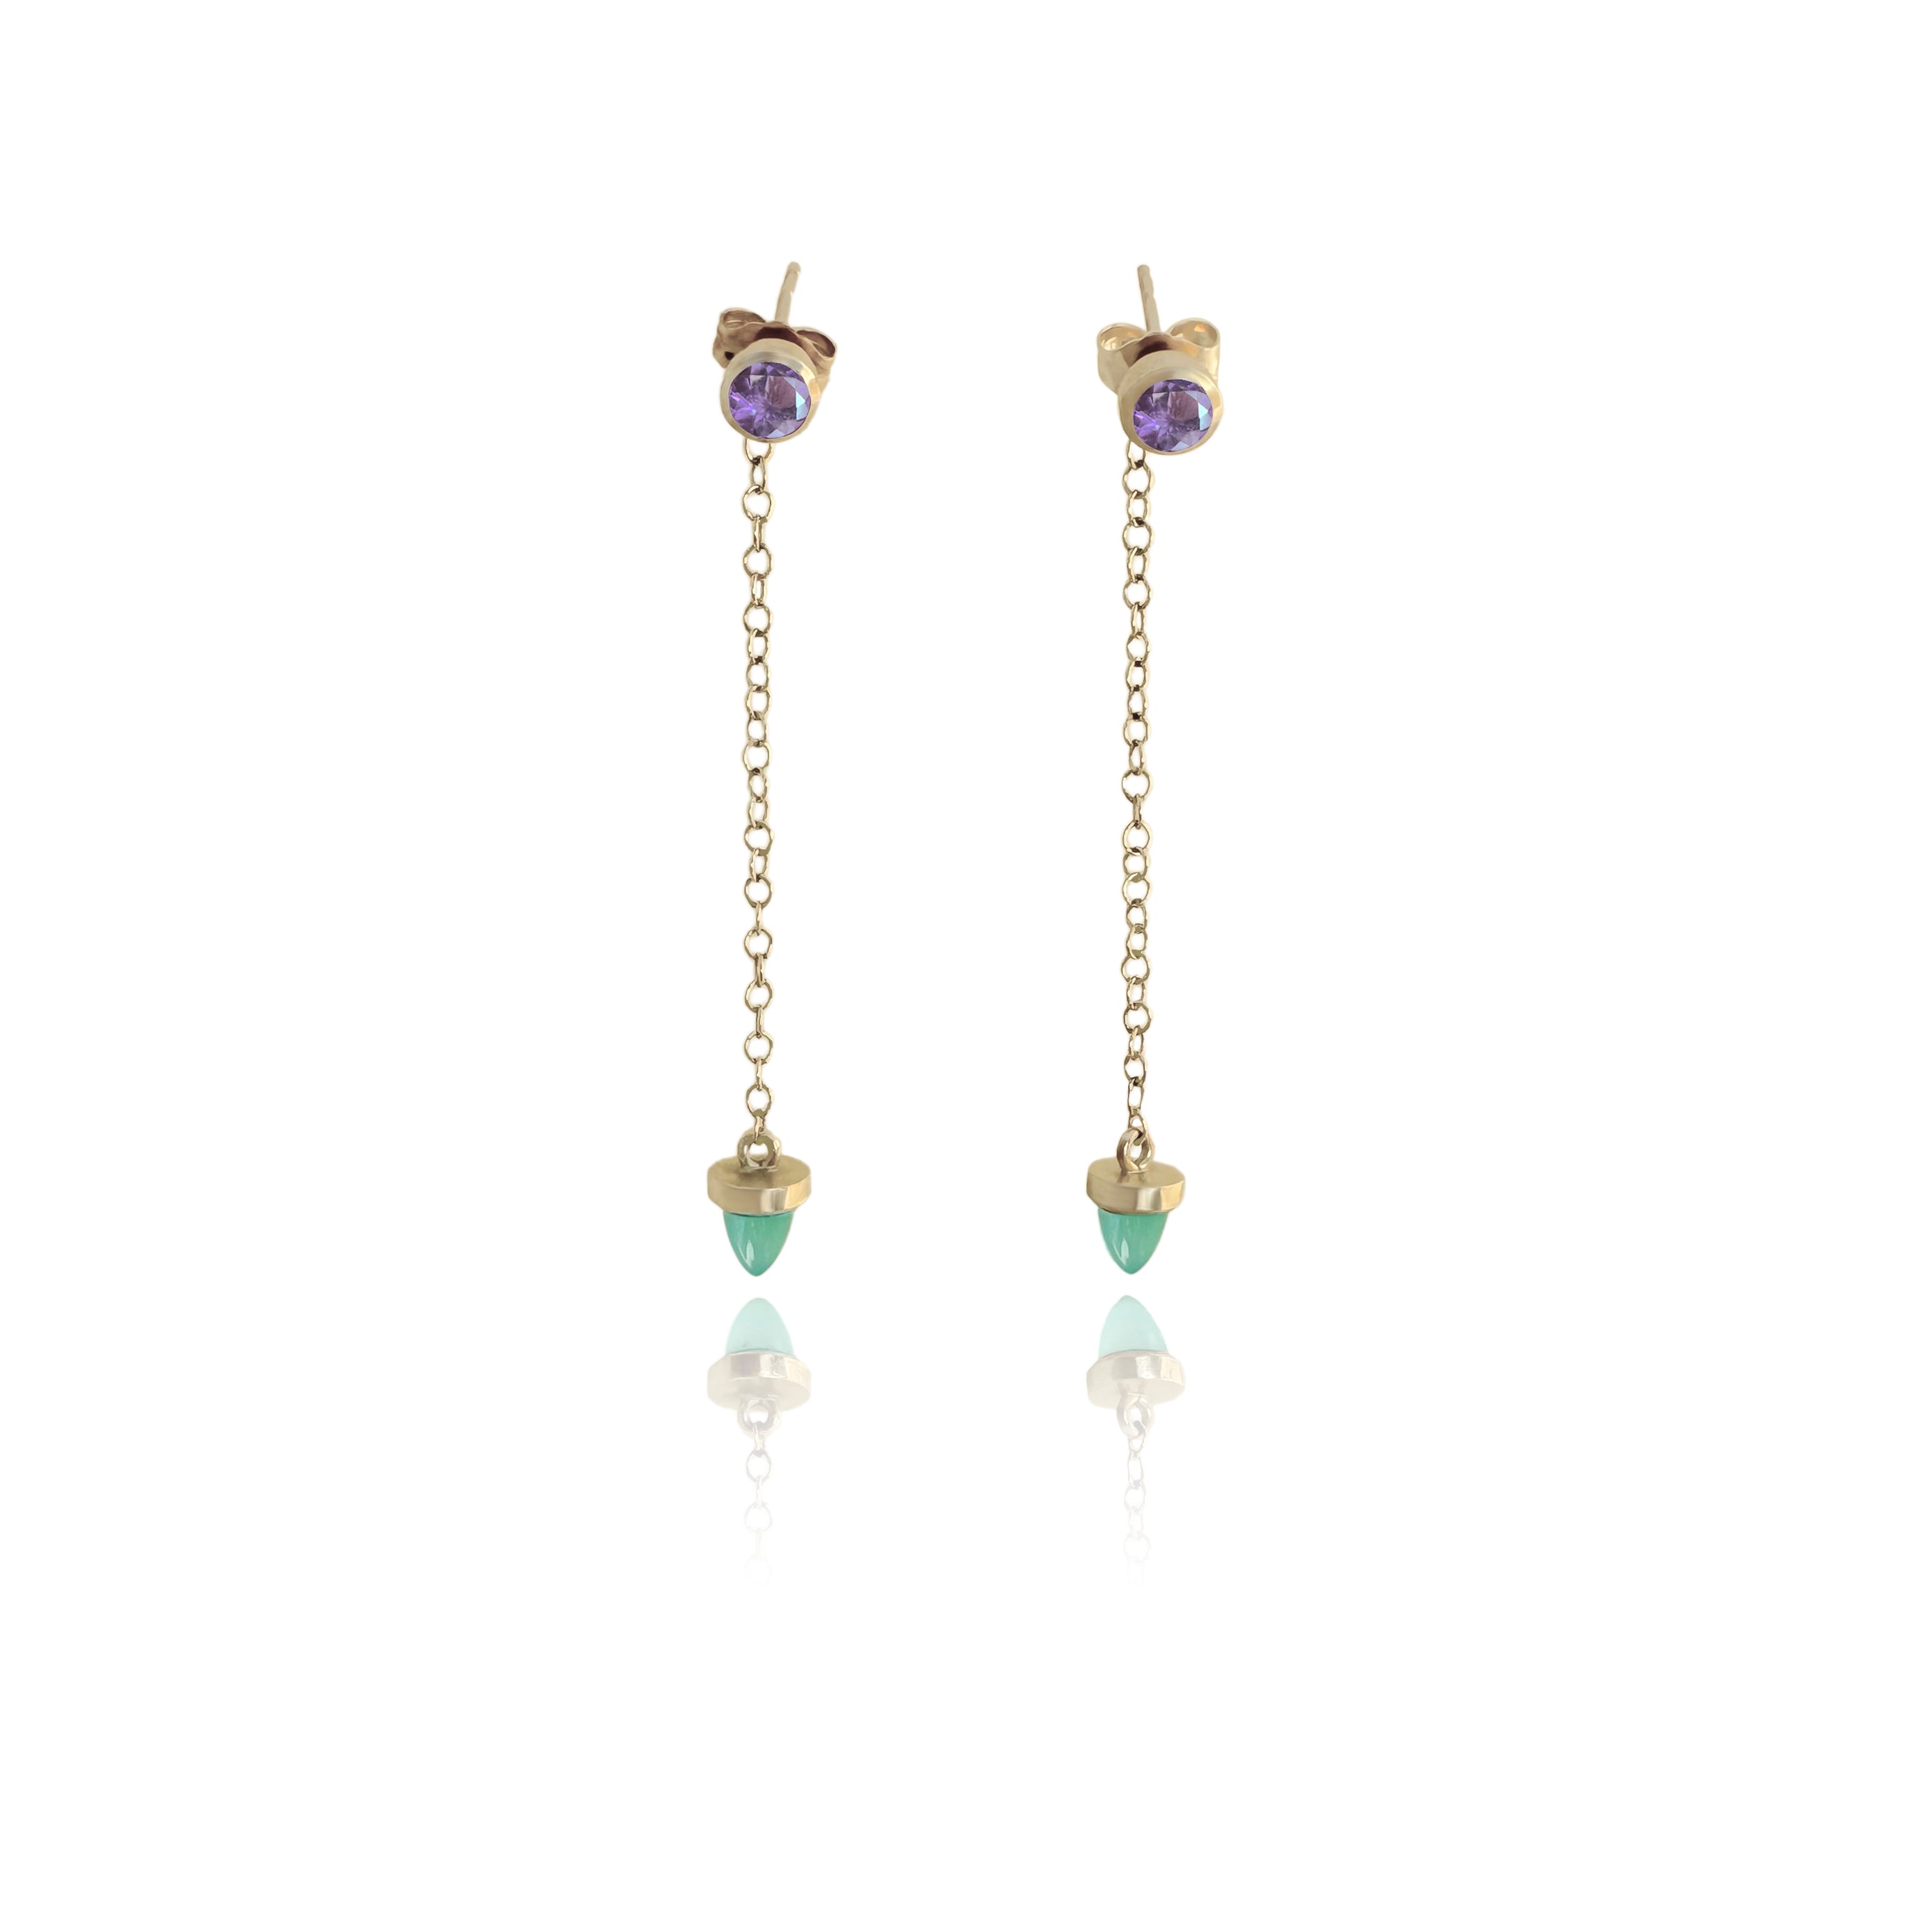 TRANSFORMABLE AMETHYST AND CHRYSOPRASE EARRINGS IN 10K YELLOW GOLD